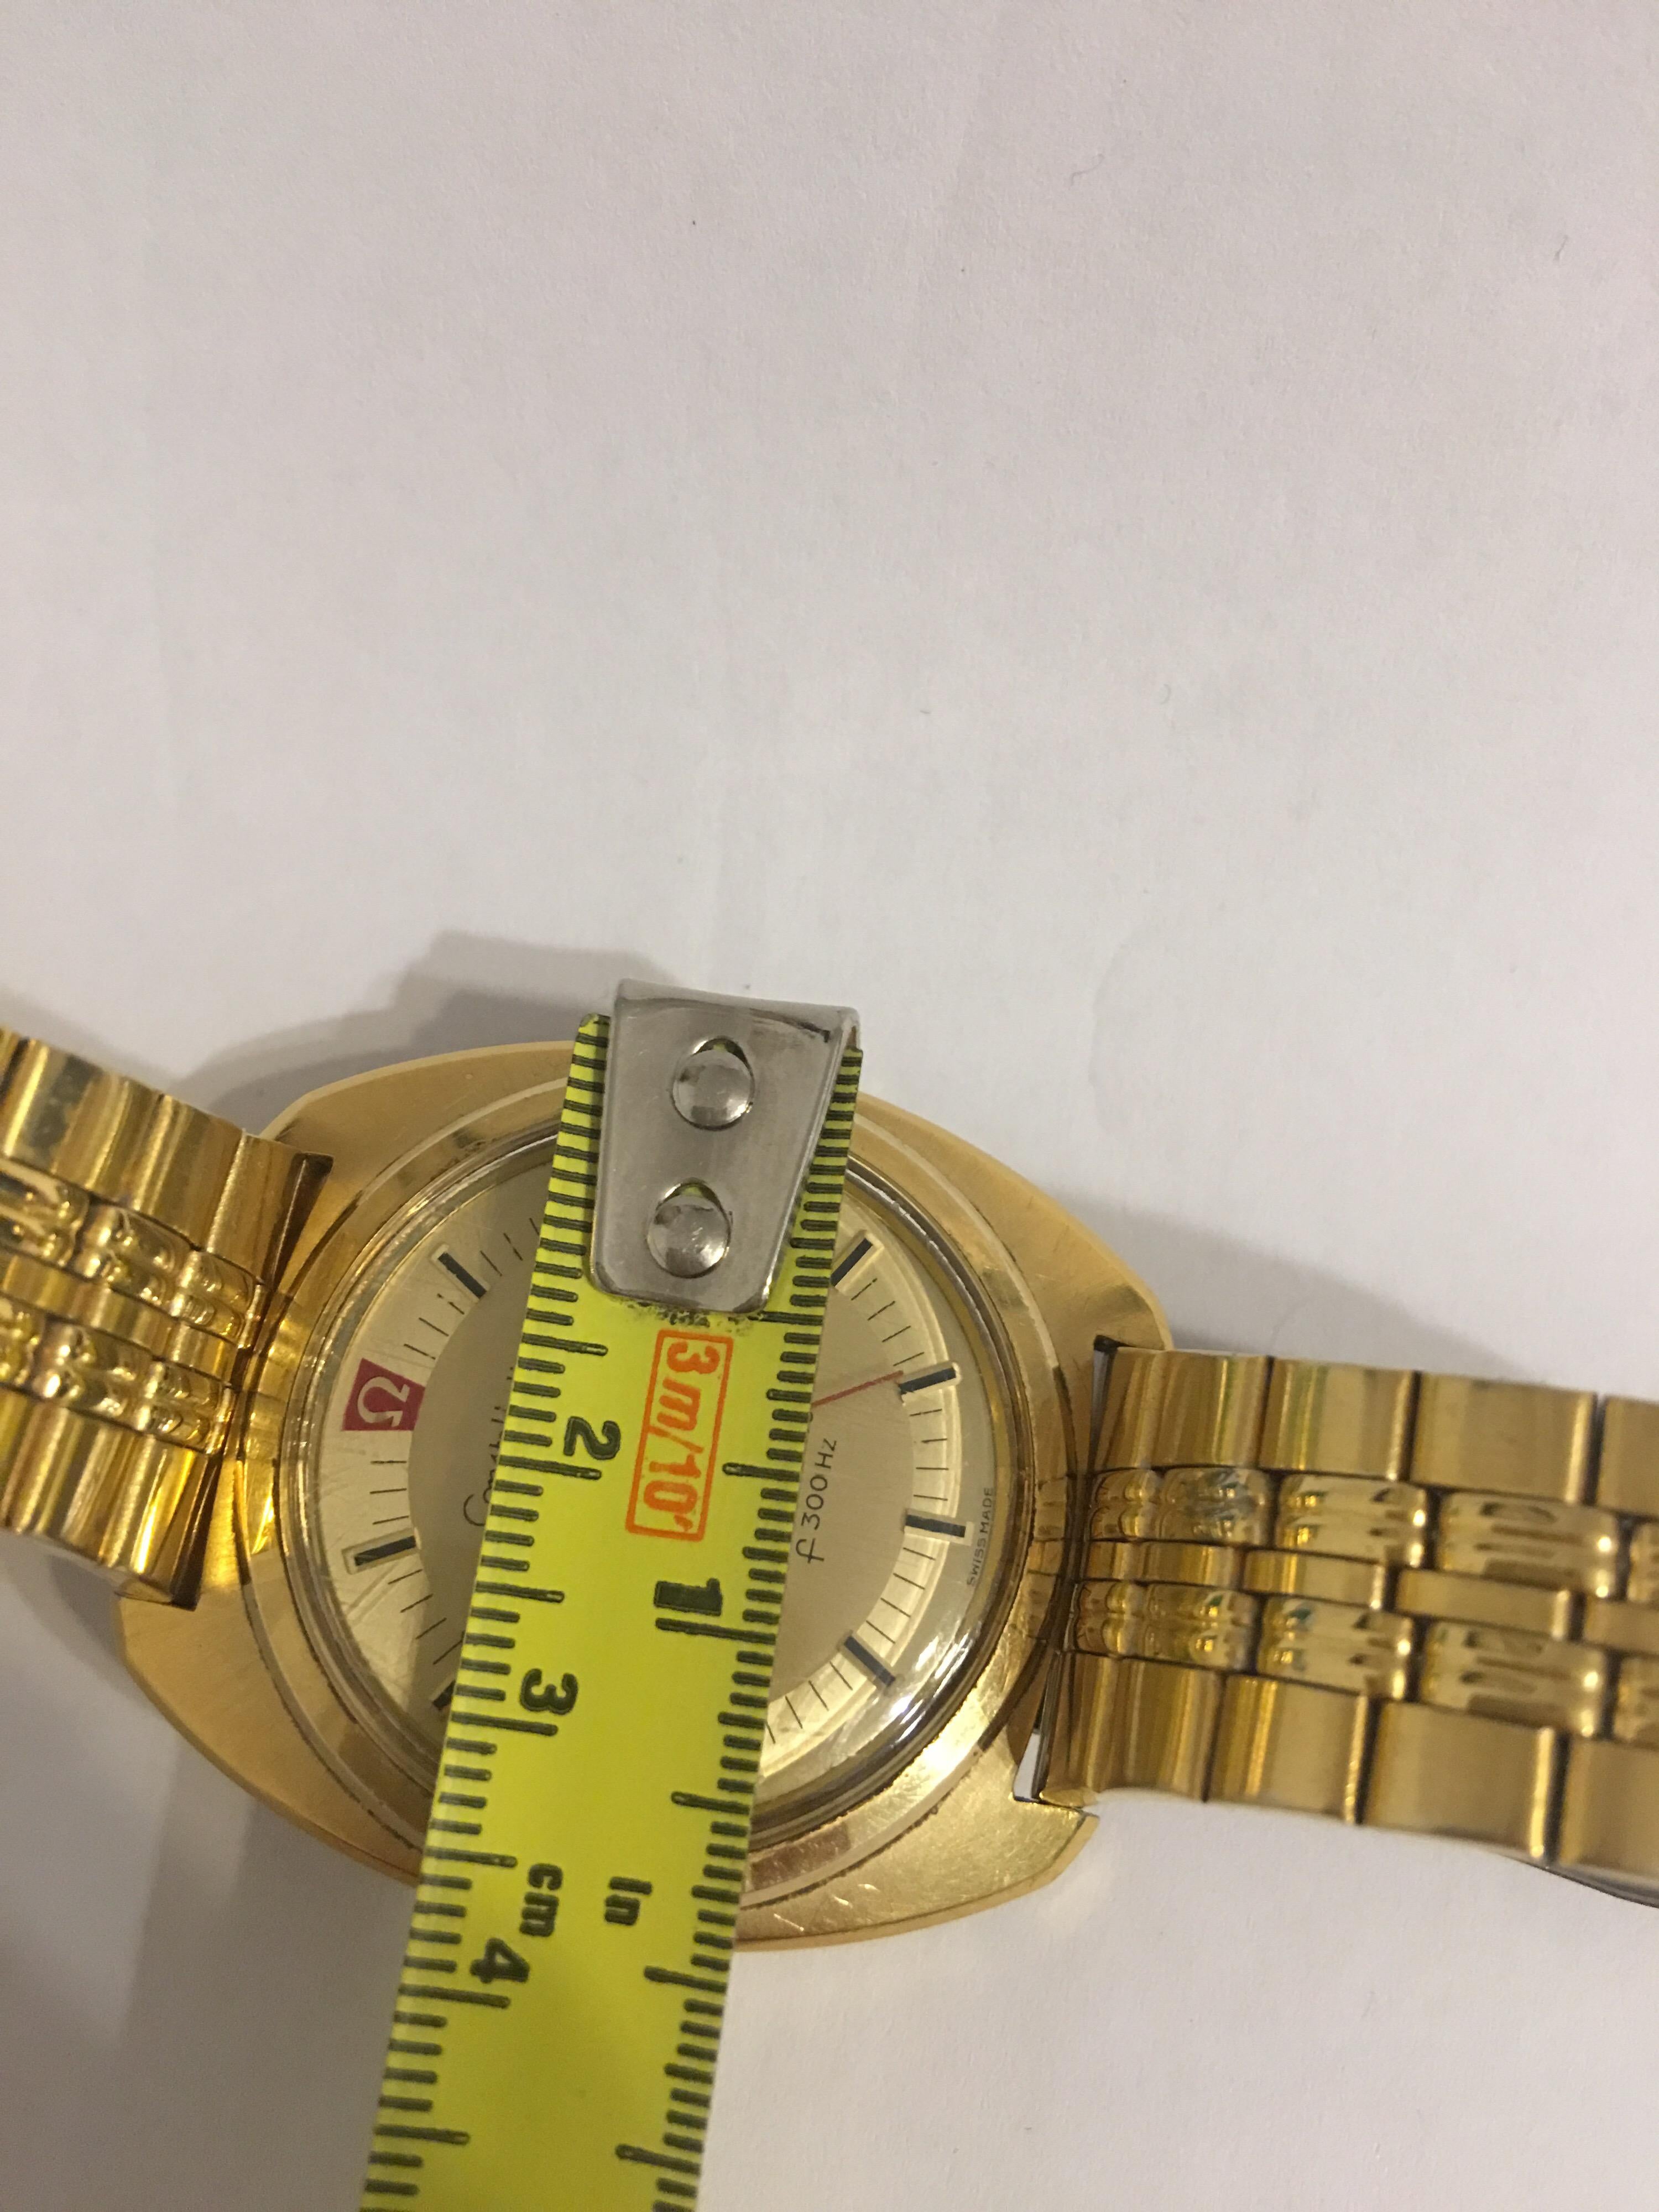 Vintage 1970s Omega Constellation F300HZ Gold-Plated Electronic Watch 5